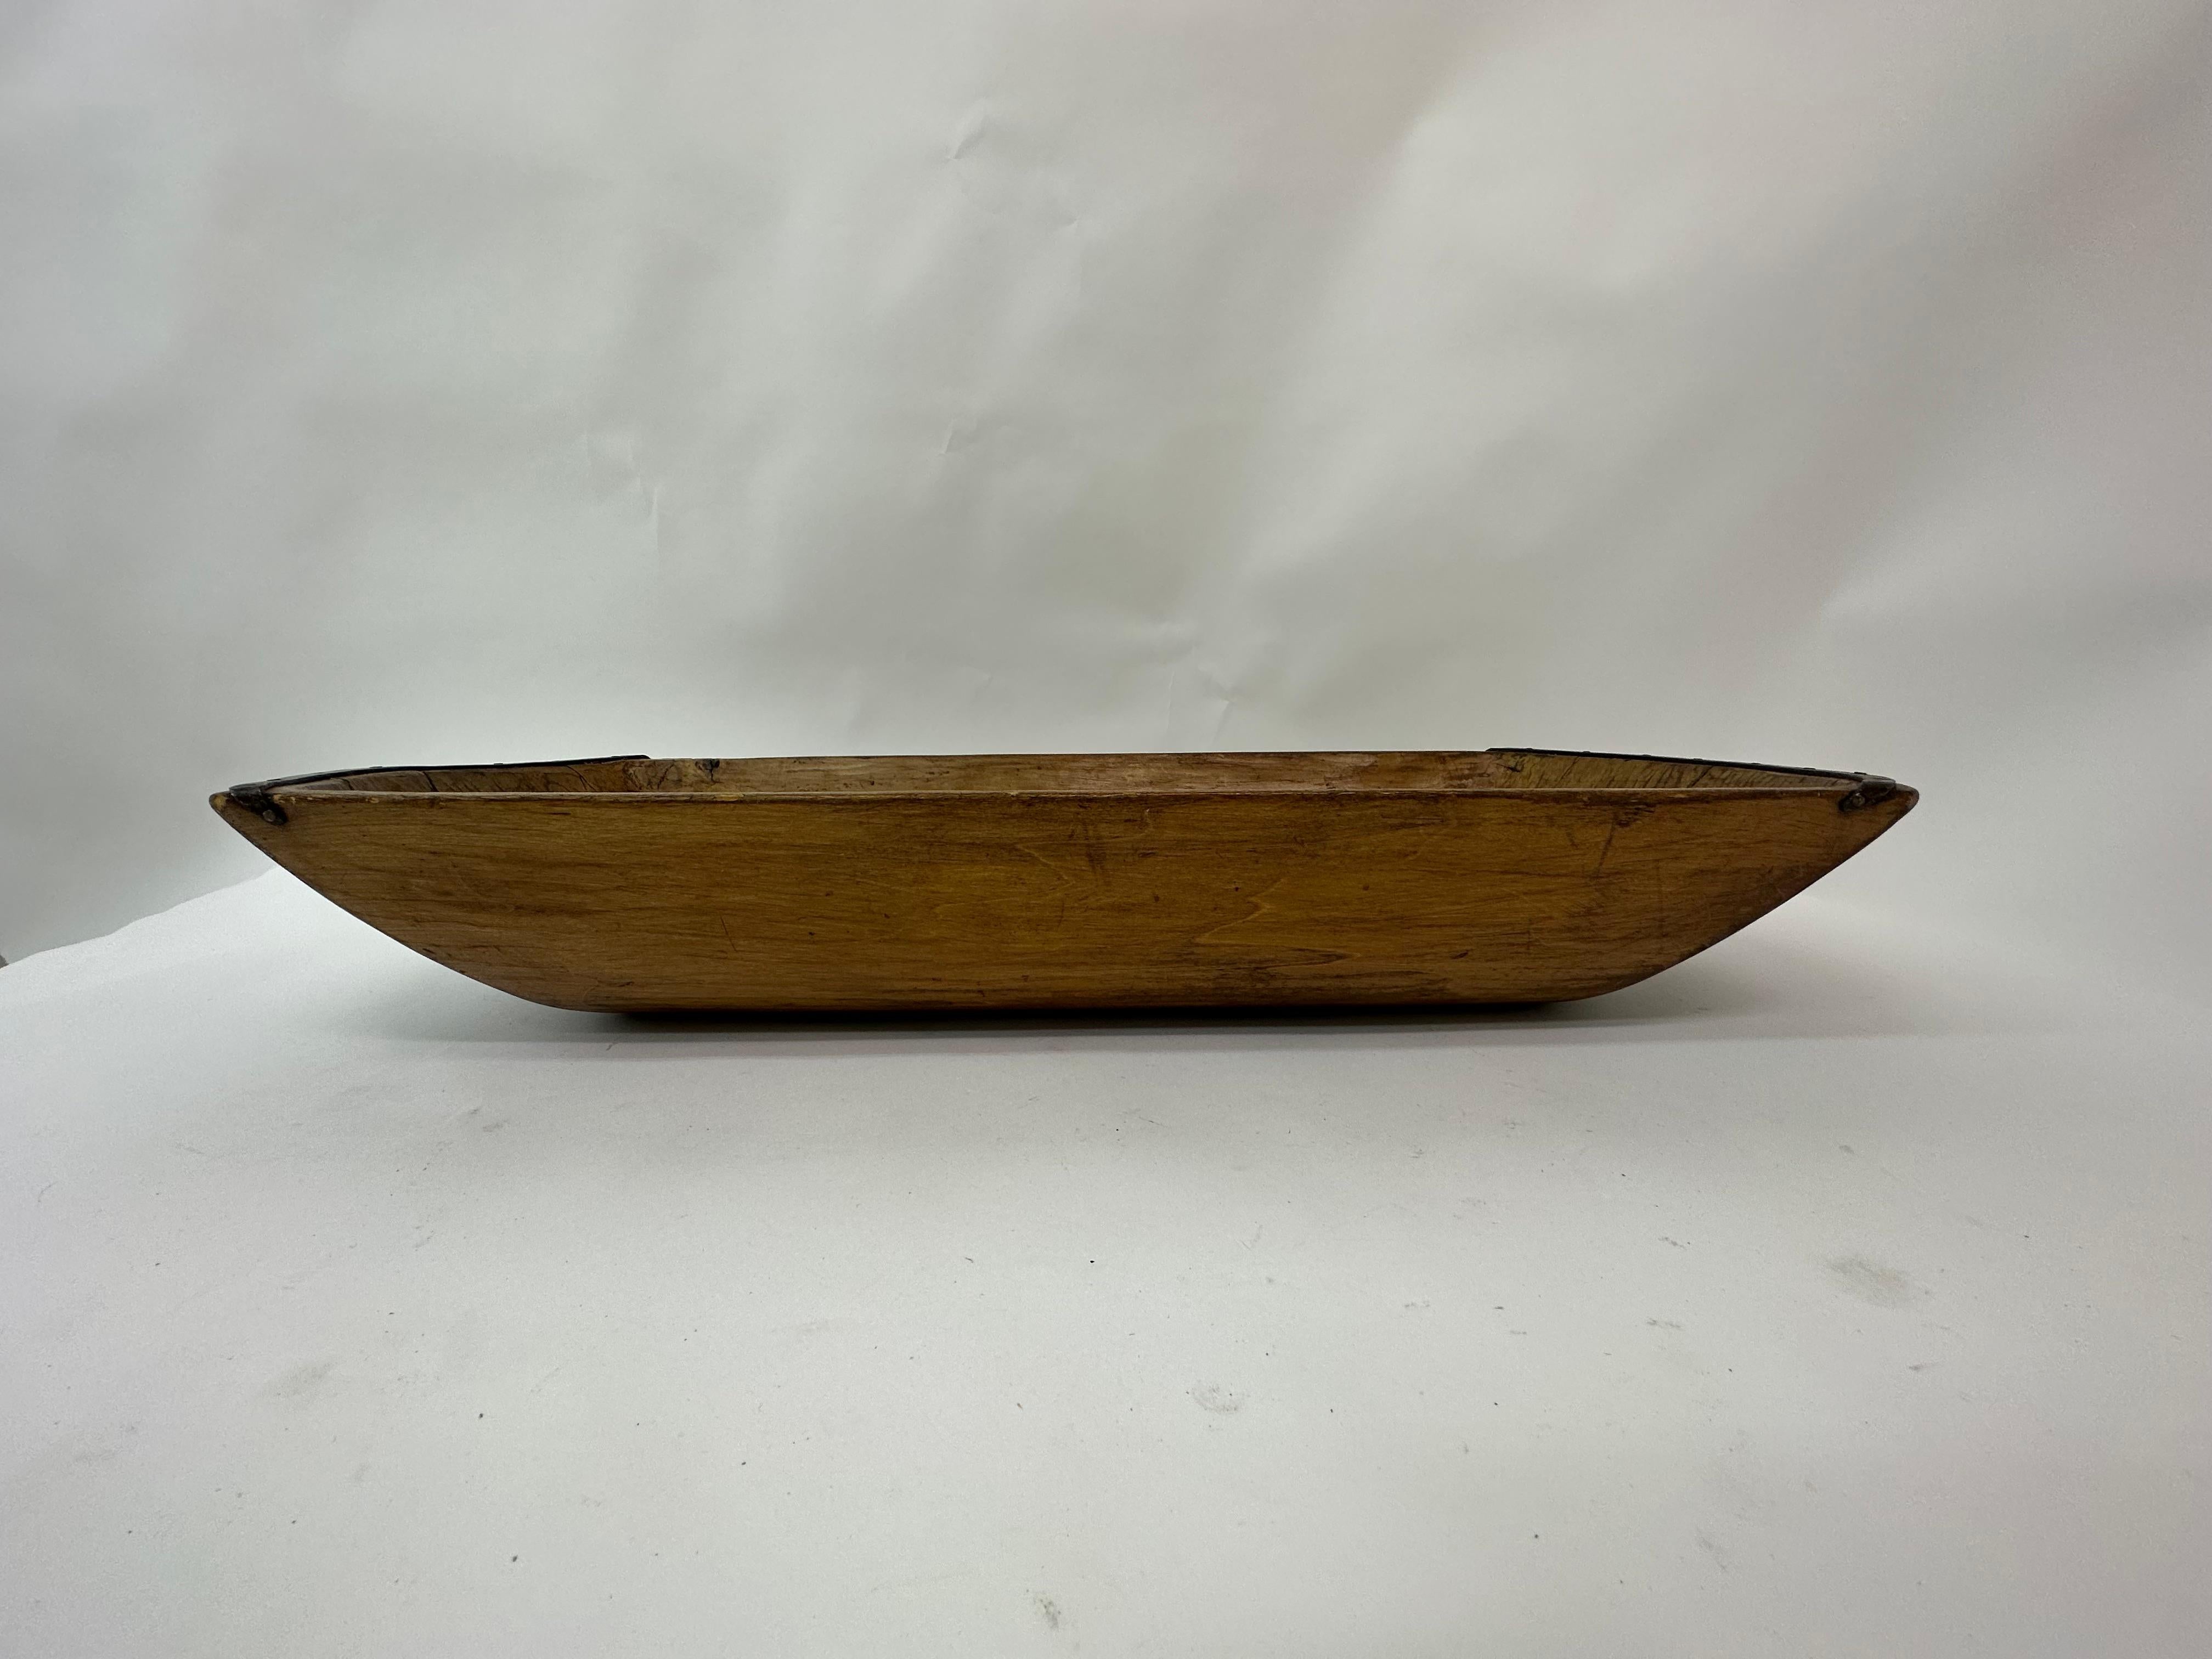 Medieval Antique wooden dough bowl trough hand carved with metal details 1900’s